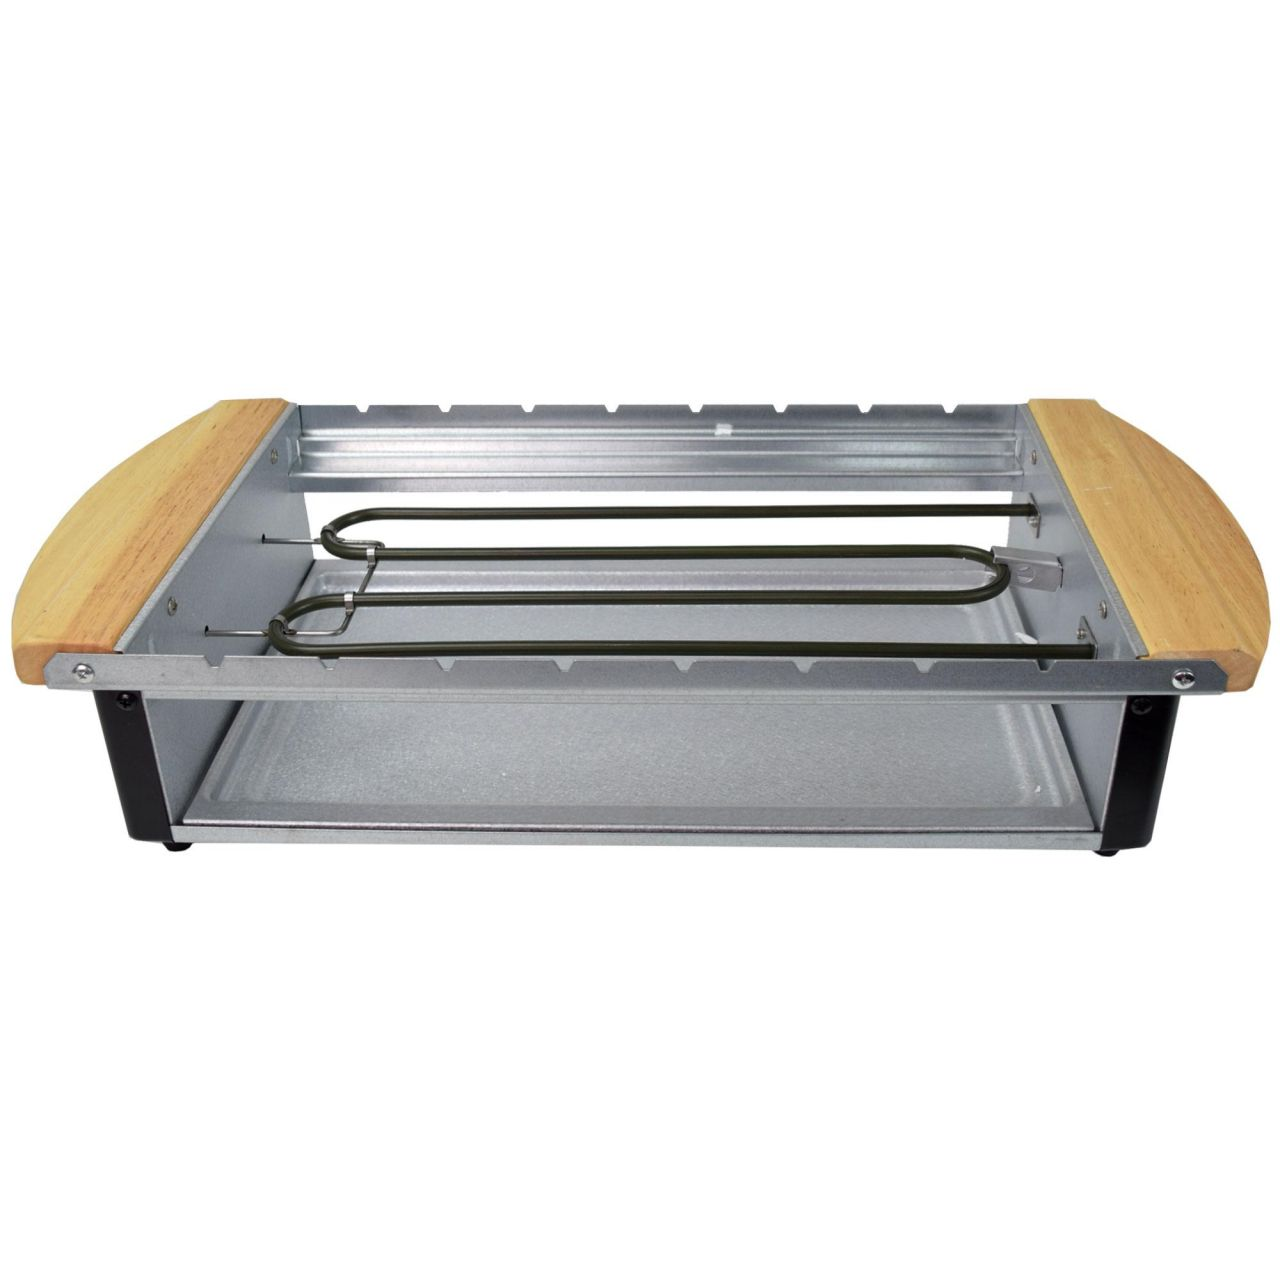 SYNTROX Raclette-Grill Raclette